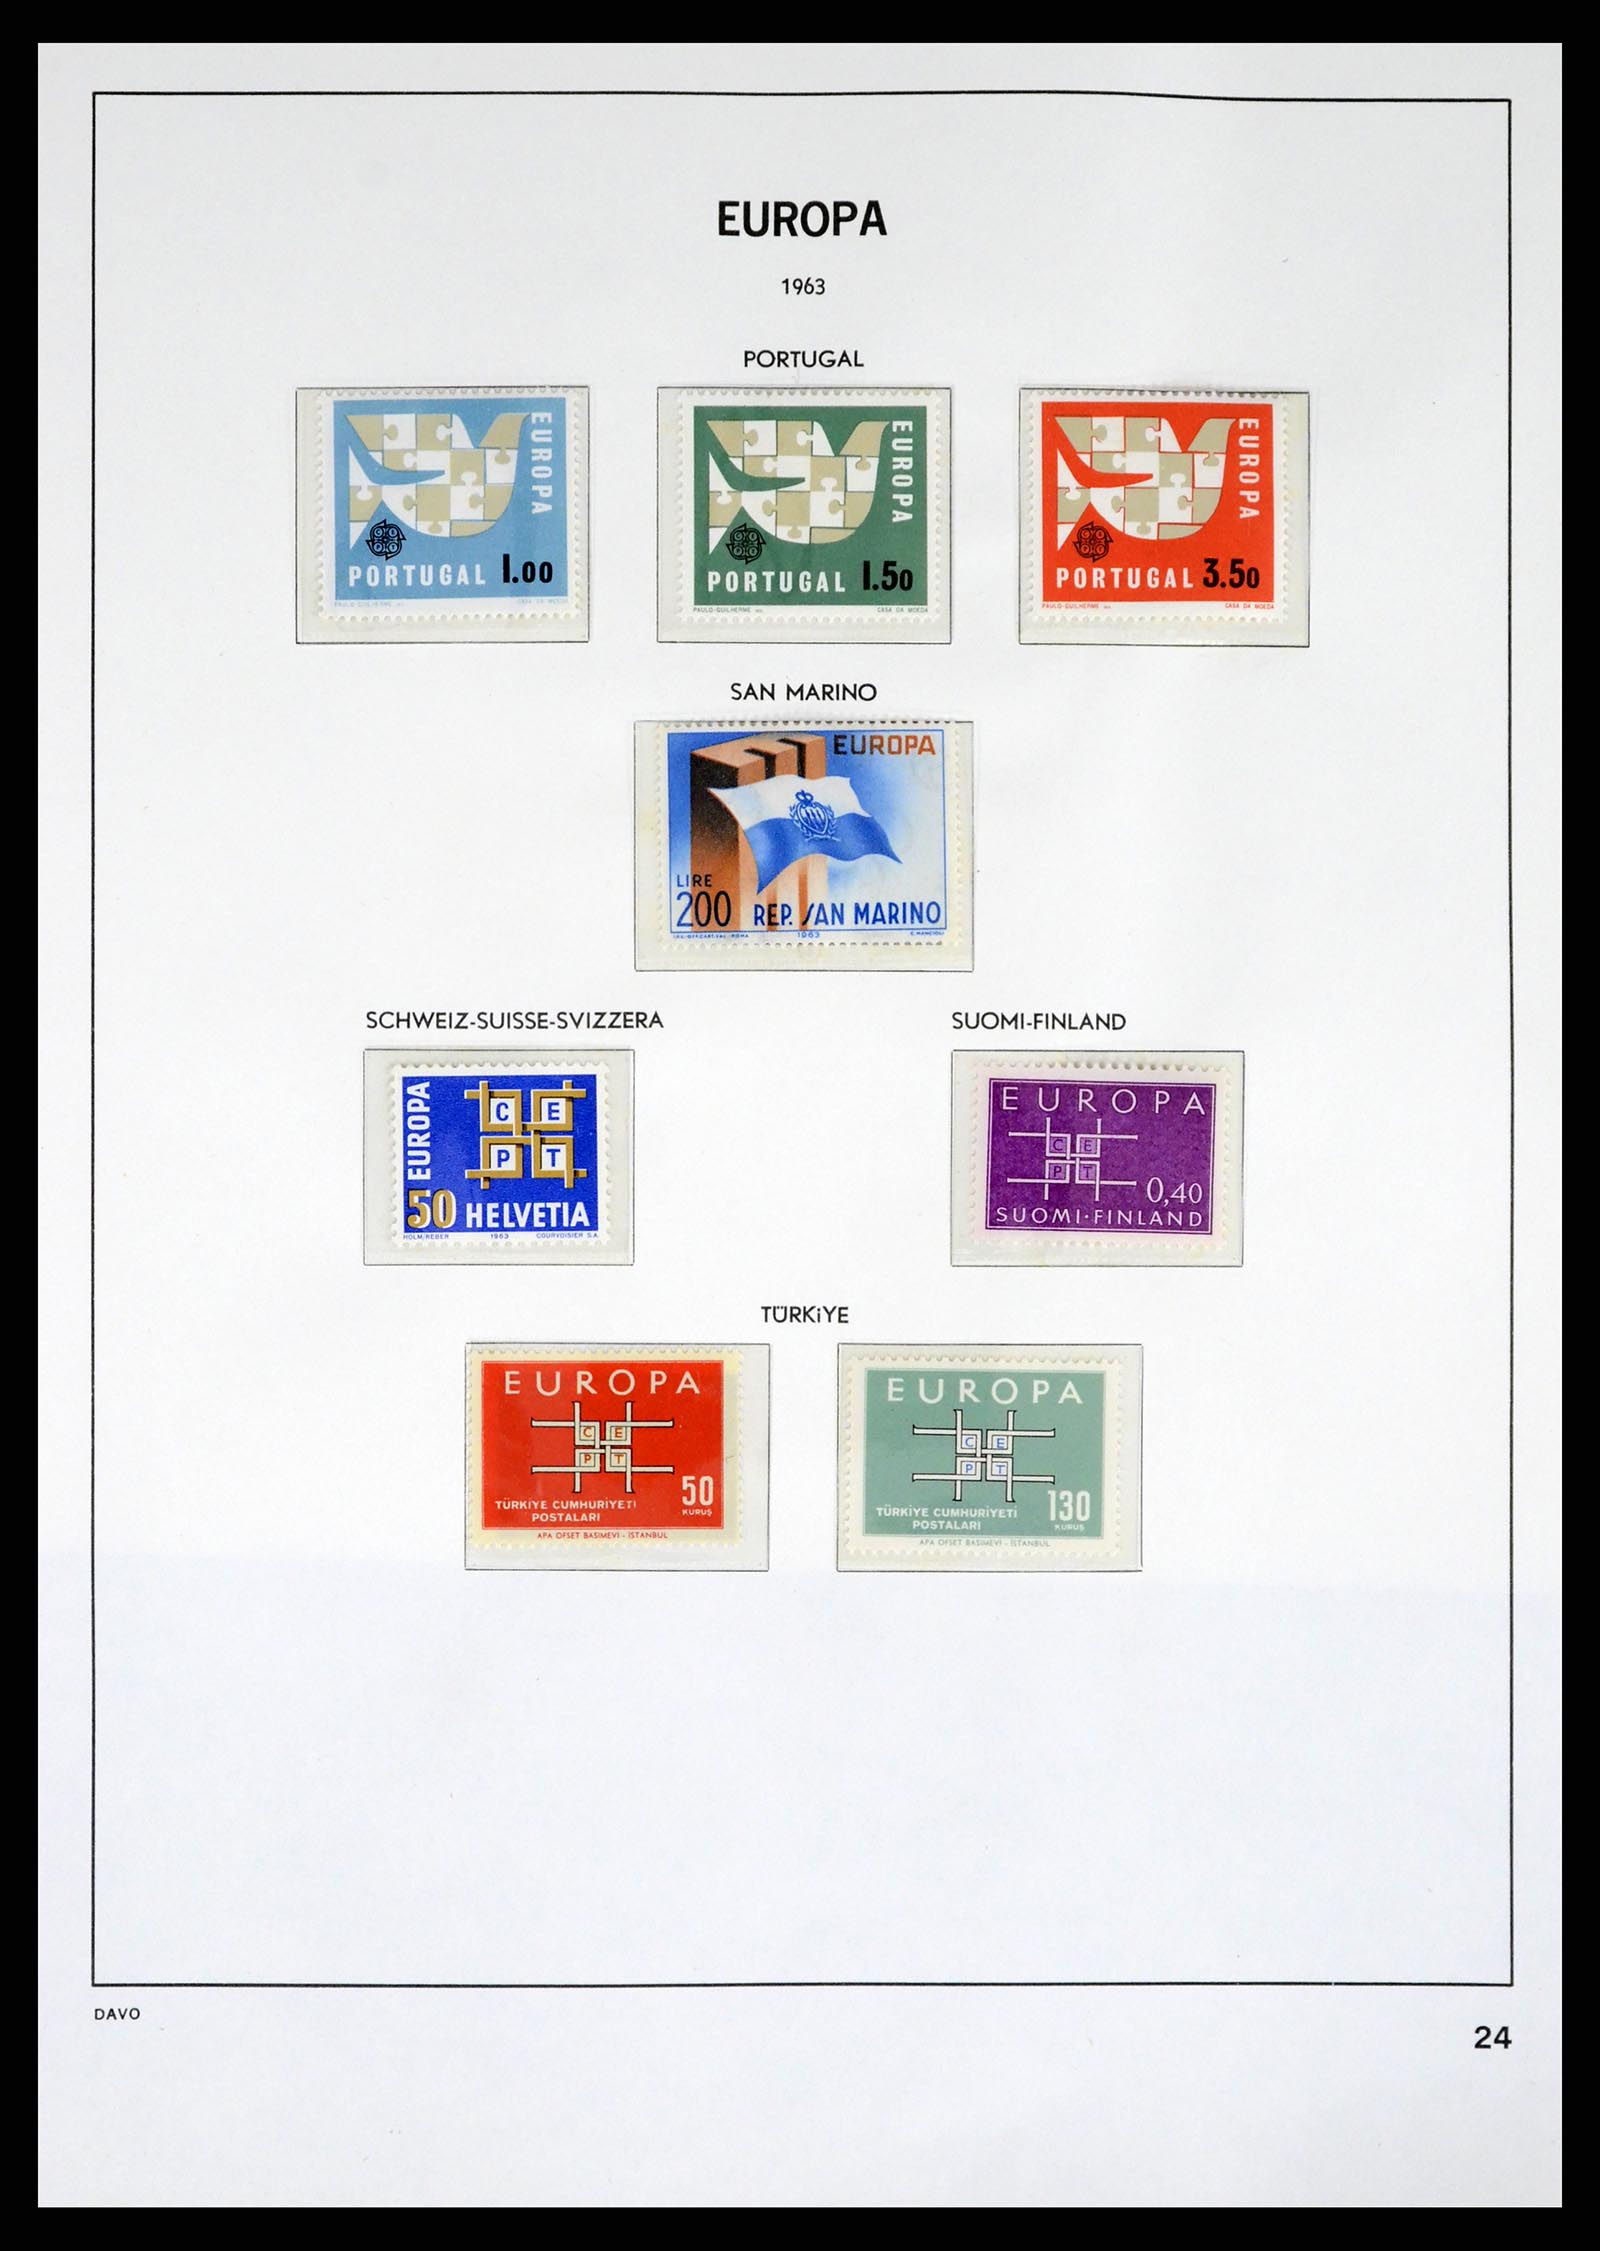 37325 024 - Stamp collection 37325 Europa CEPT 1956-20011.